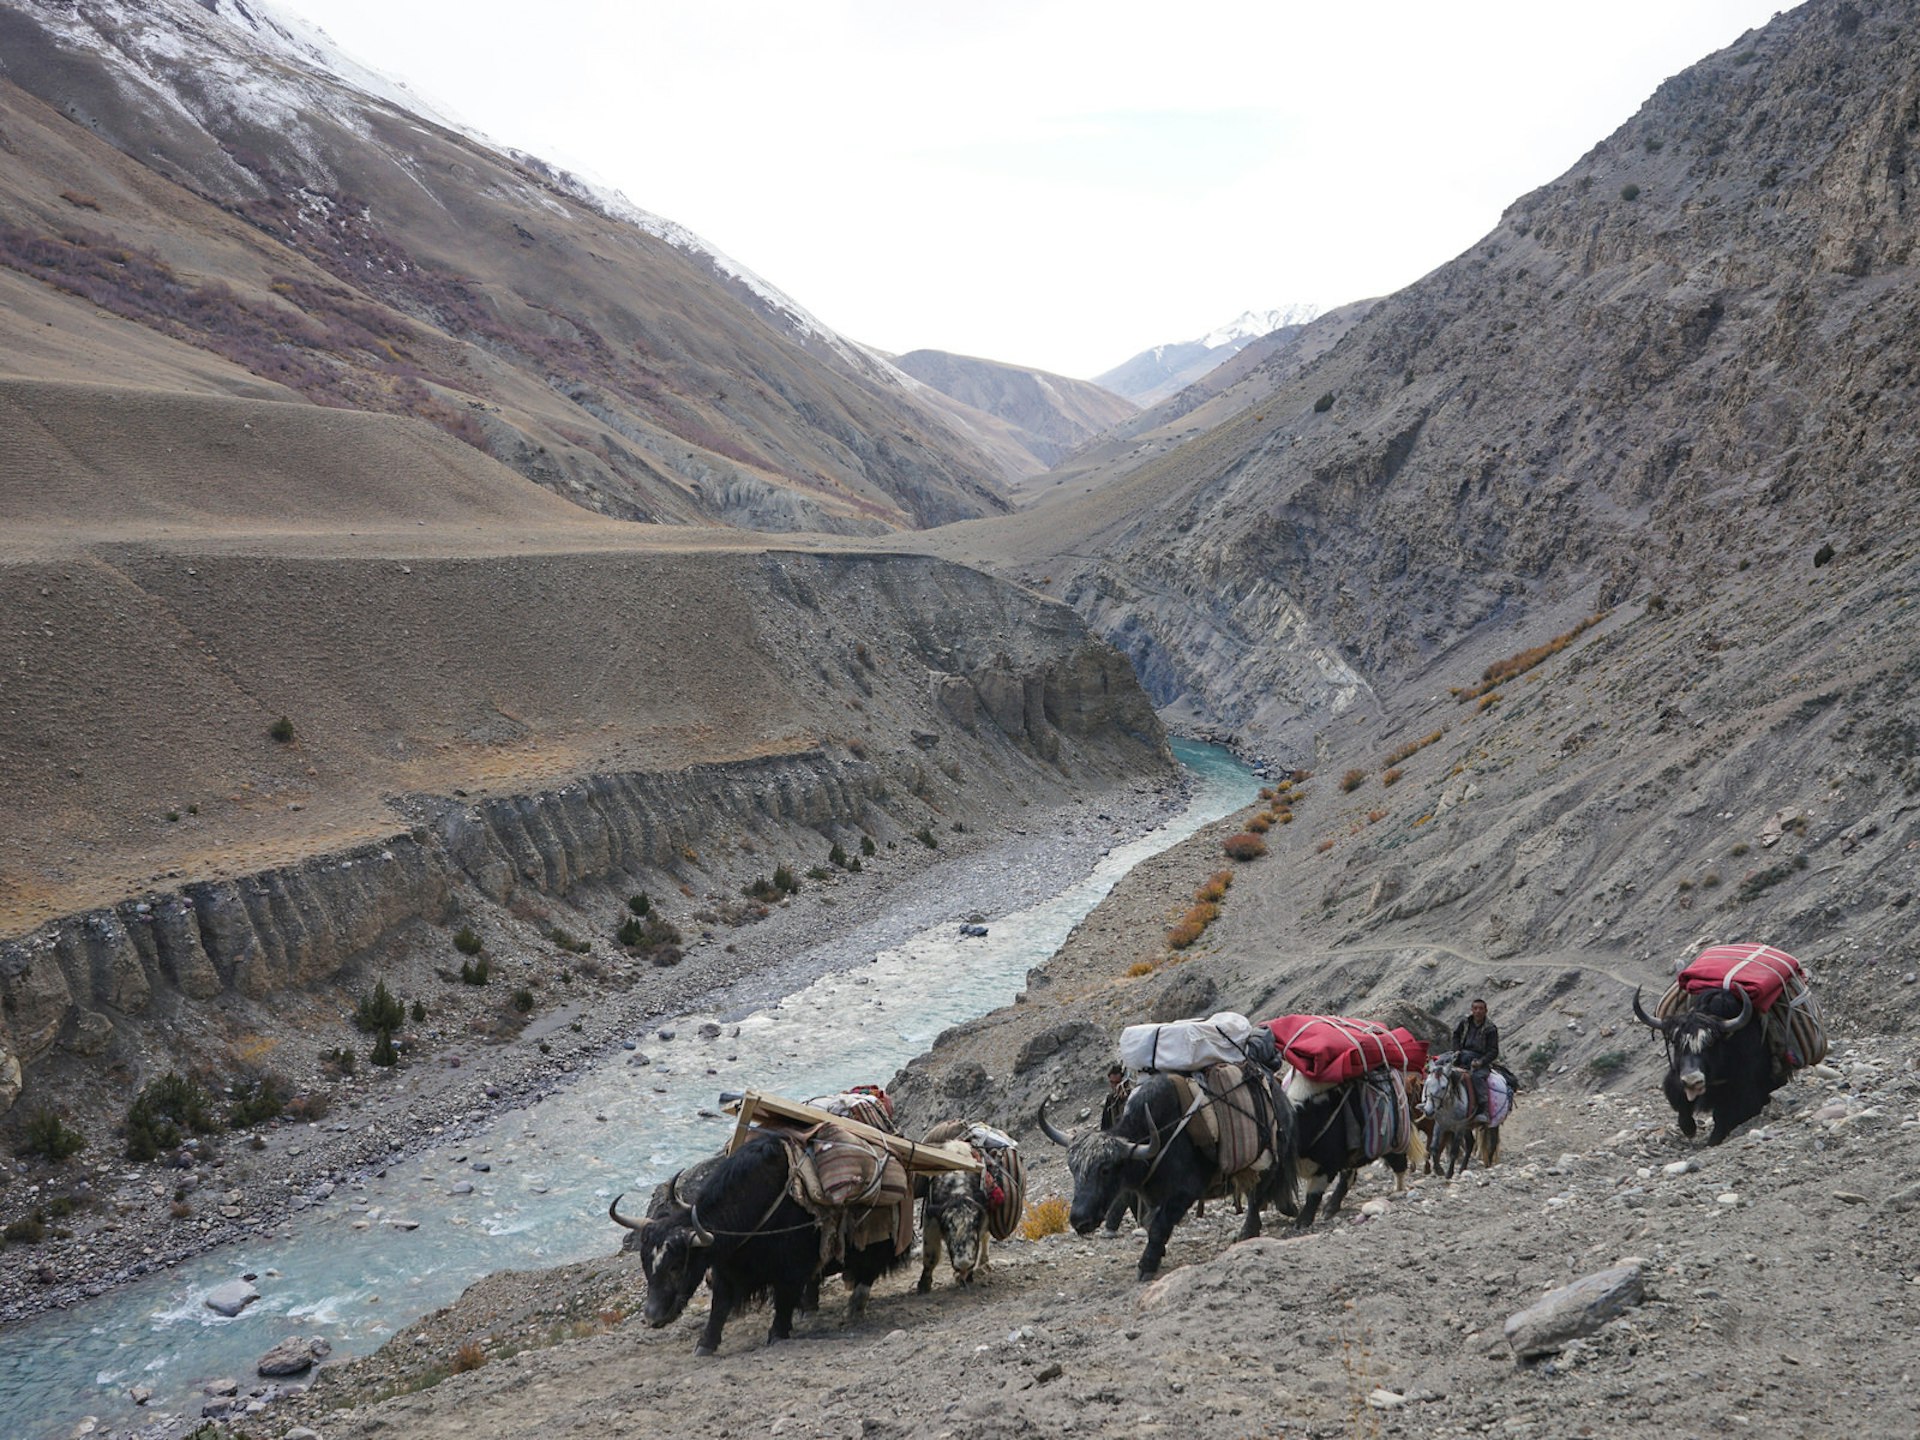 A herd of yaks carrying bundles of goods walks up a mountainside with a green river below in the distance